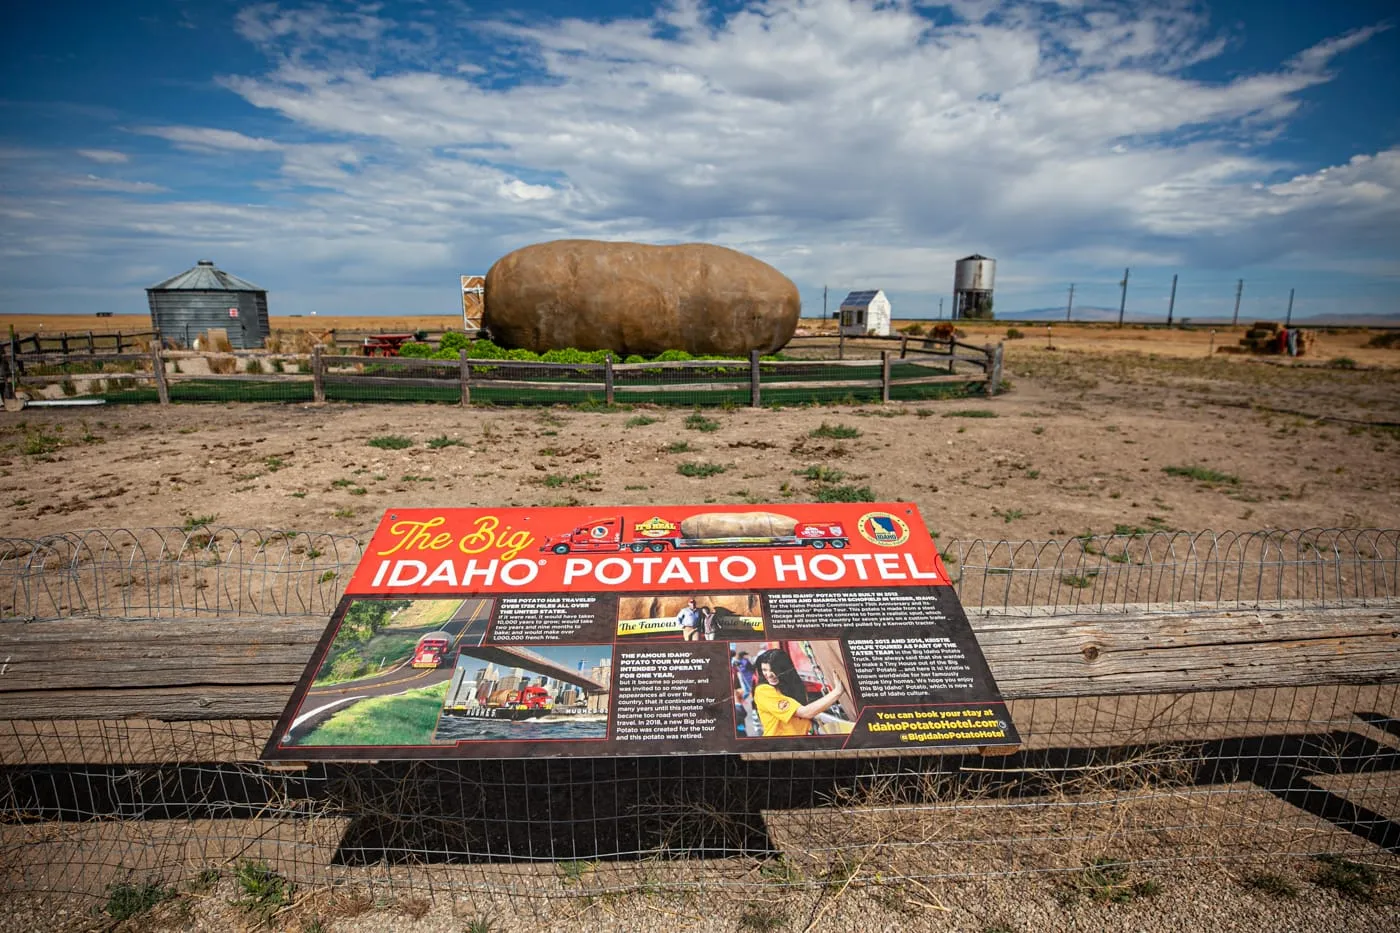 Big Idaho Potato Hotel AirBNB in Boise, Idaho - an AirBNB made from a giant potato | Idaho Roadside Attractions  and Weird Hotels